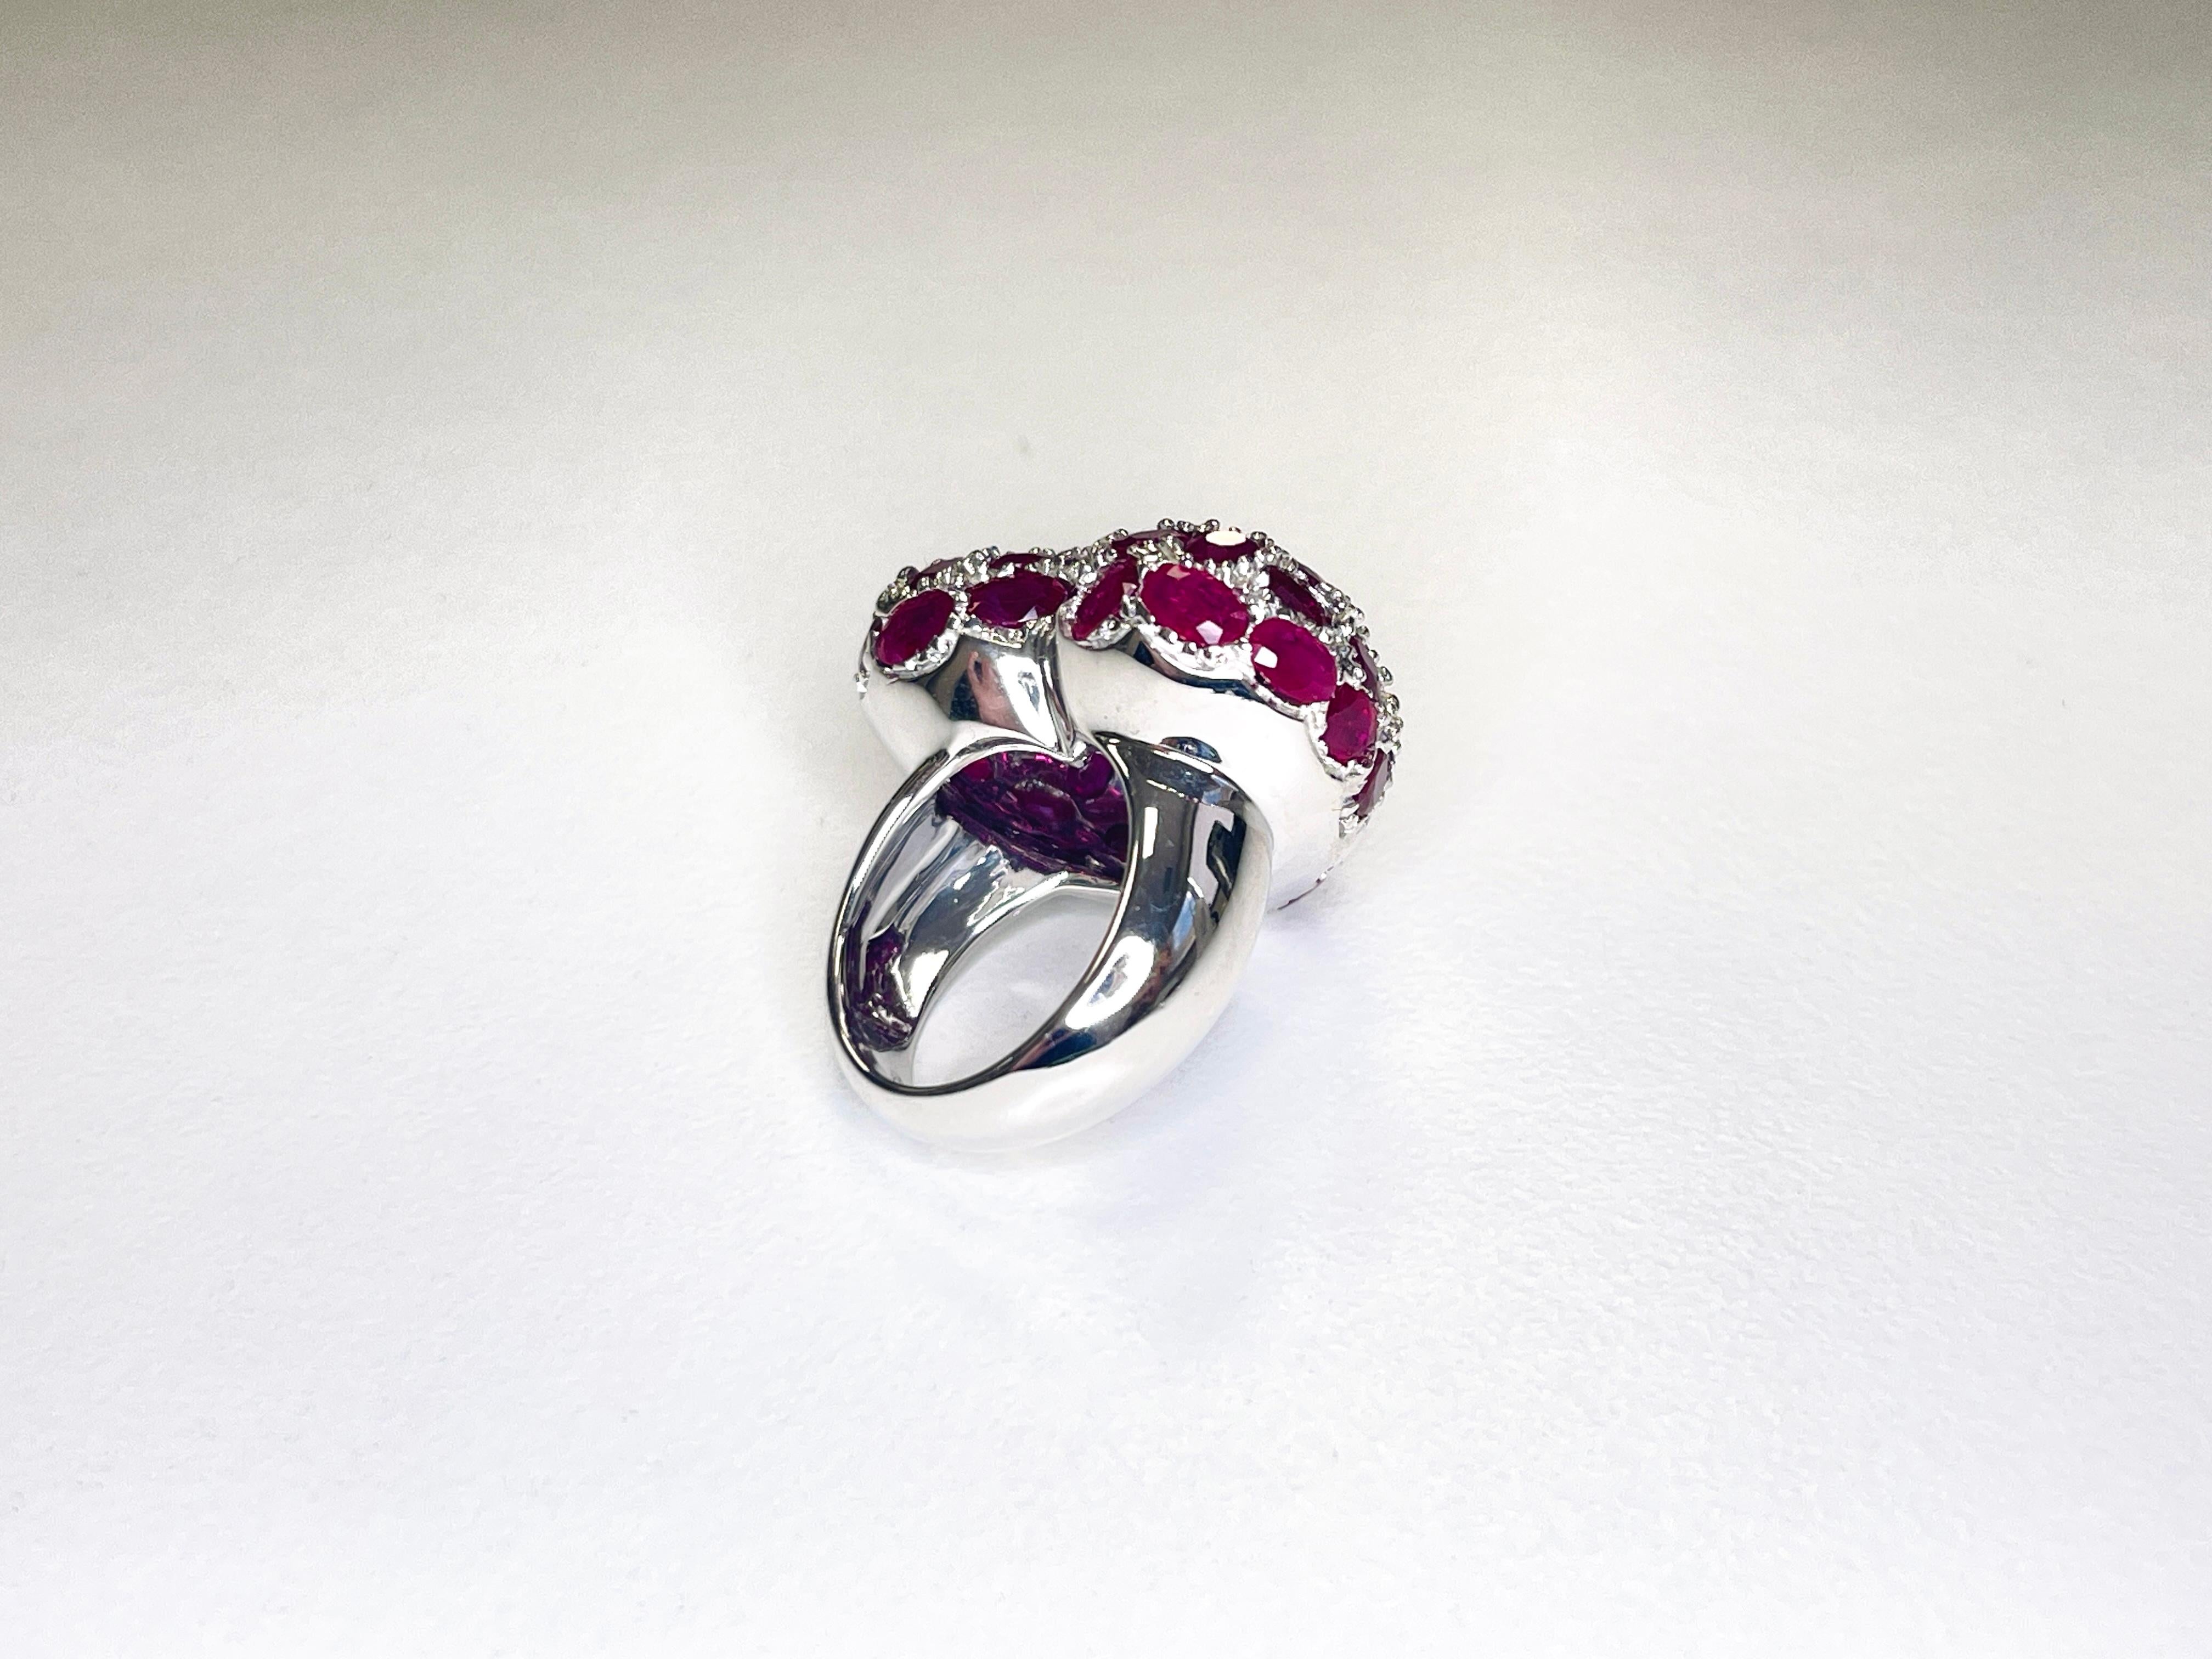 16.50cts White Gold Heart Ruby Oval Shape High Polished Rhodium Ring 18K 7 Inch For Sale 2